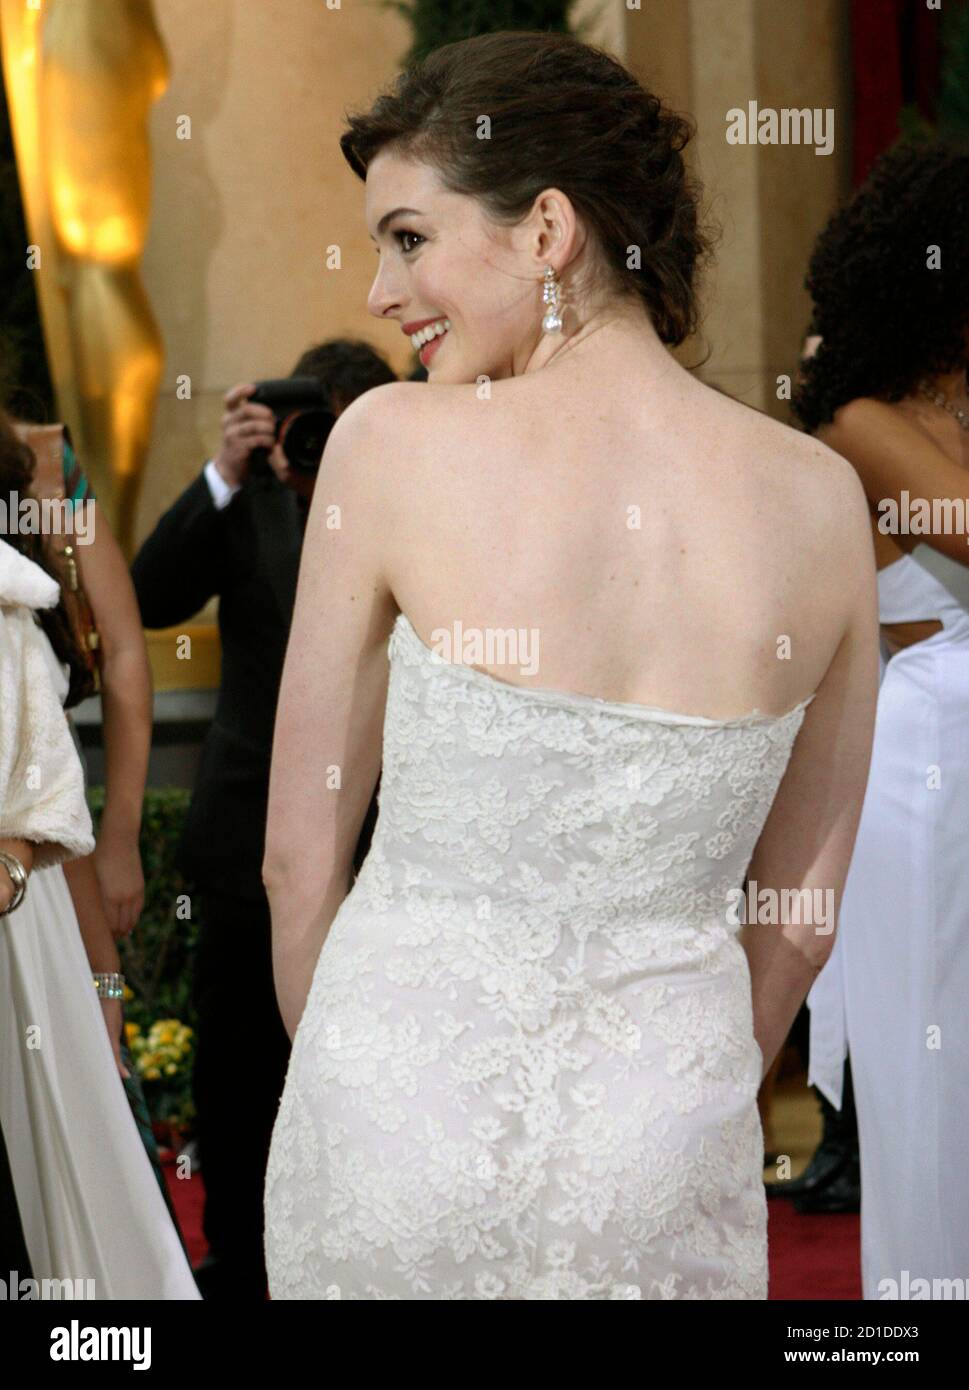 Actress and presenter Anne Hathaway arrives at the 79th Annual Academy  Awards in Hollywood, California February 25, 2007. REUTERS/Mario Anzuoni  (UNITED STATES Fotografía de stock - Alamy